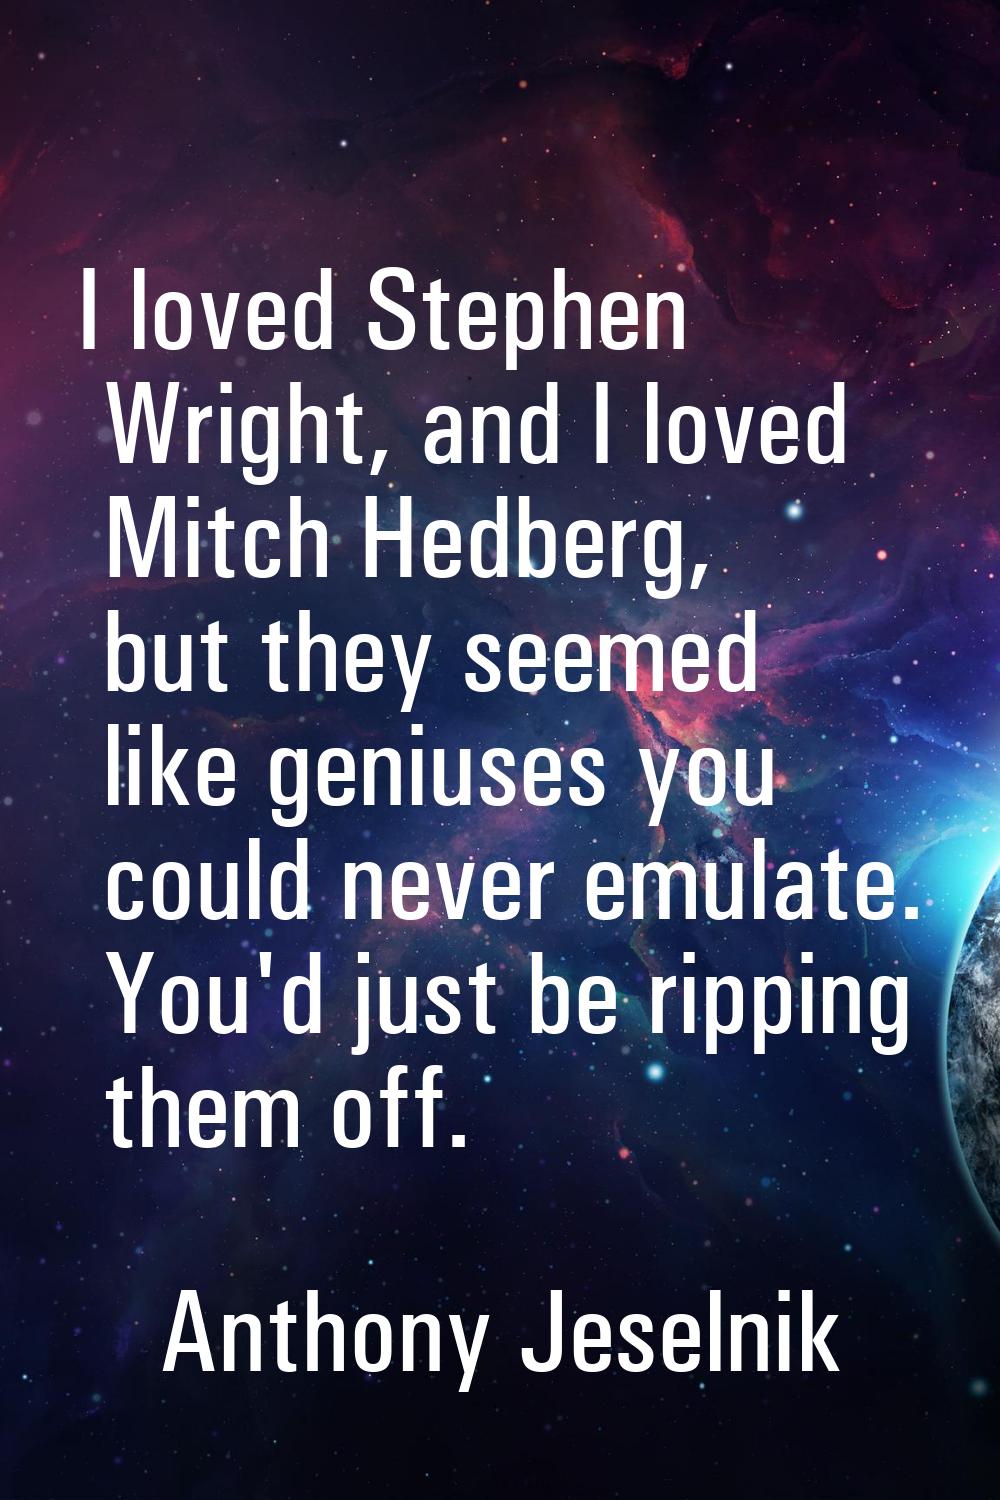 I loved Stephen Wright, and I loved Mitch Hedberg, but they seemed like geniuses you could never em